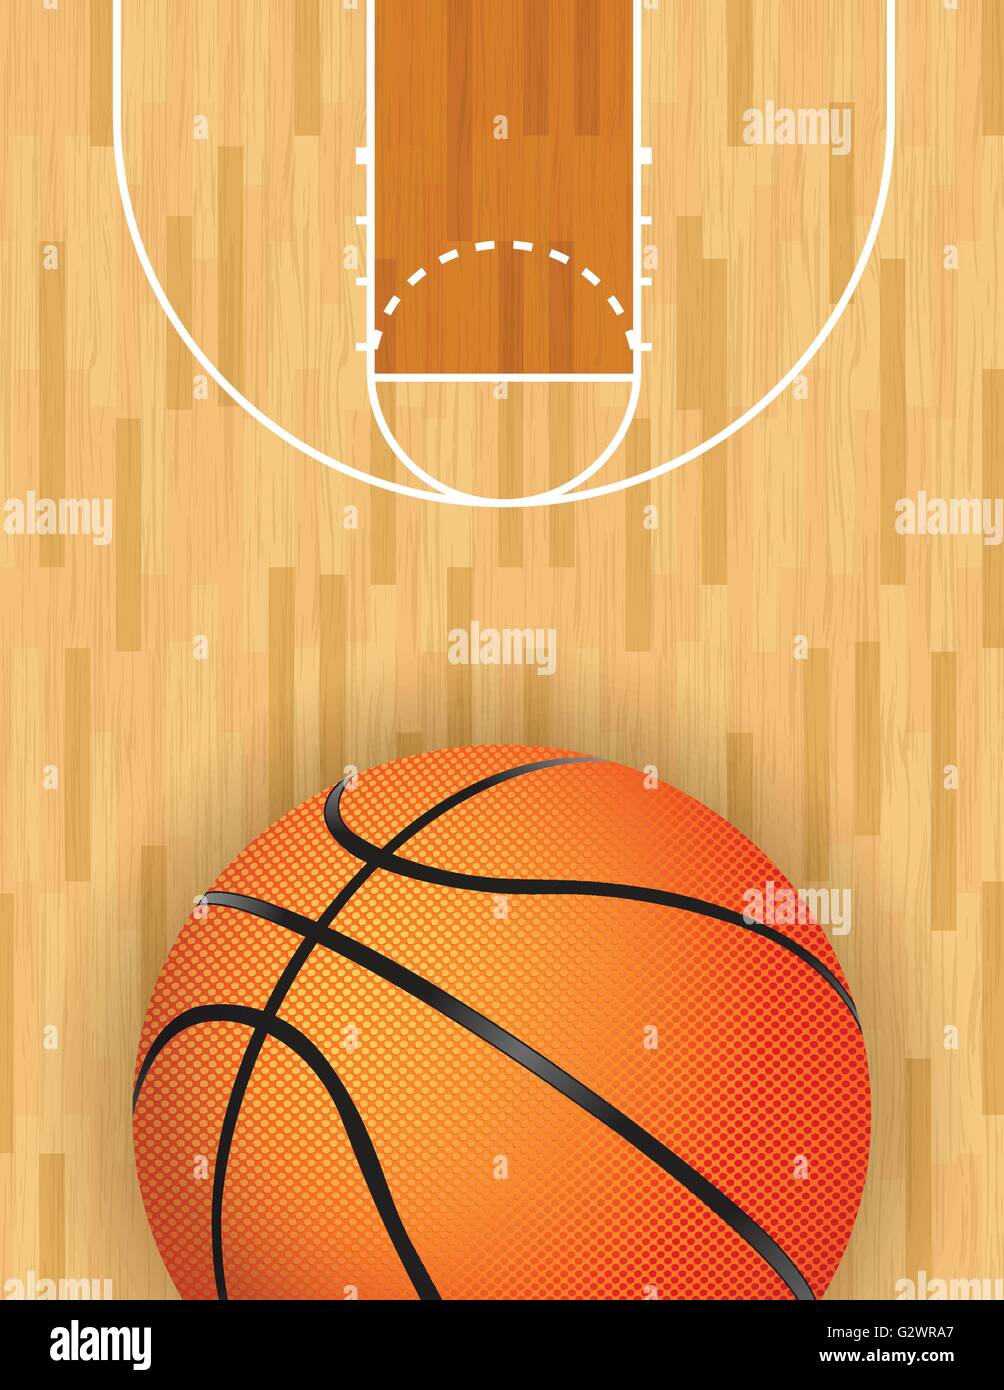 A Realistic Vector Hardwood Textured Basketball Court With